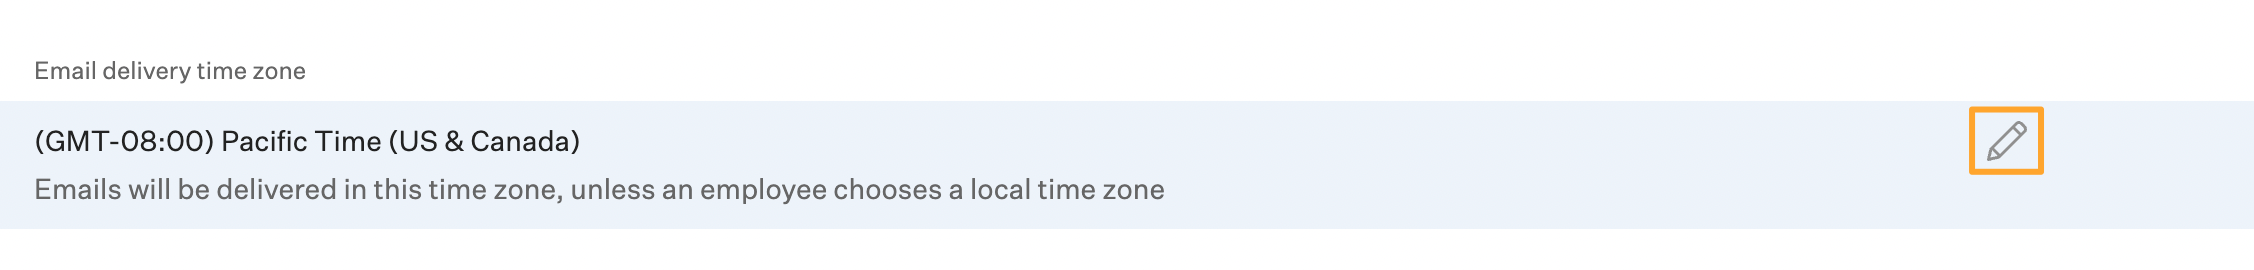 Screenshot-of-email-delivery-time-zone-section-with-edit-button-highlighted.png